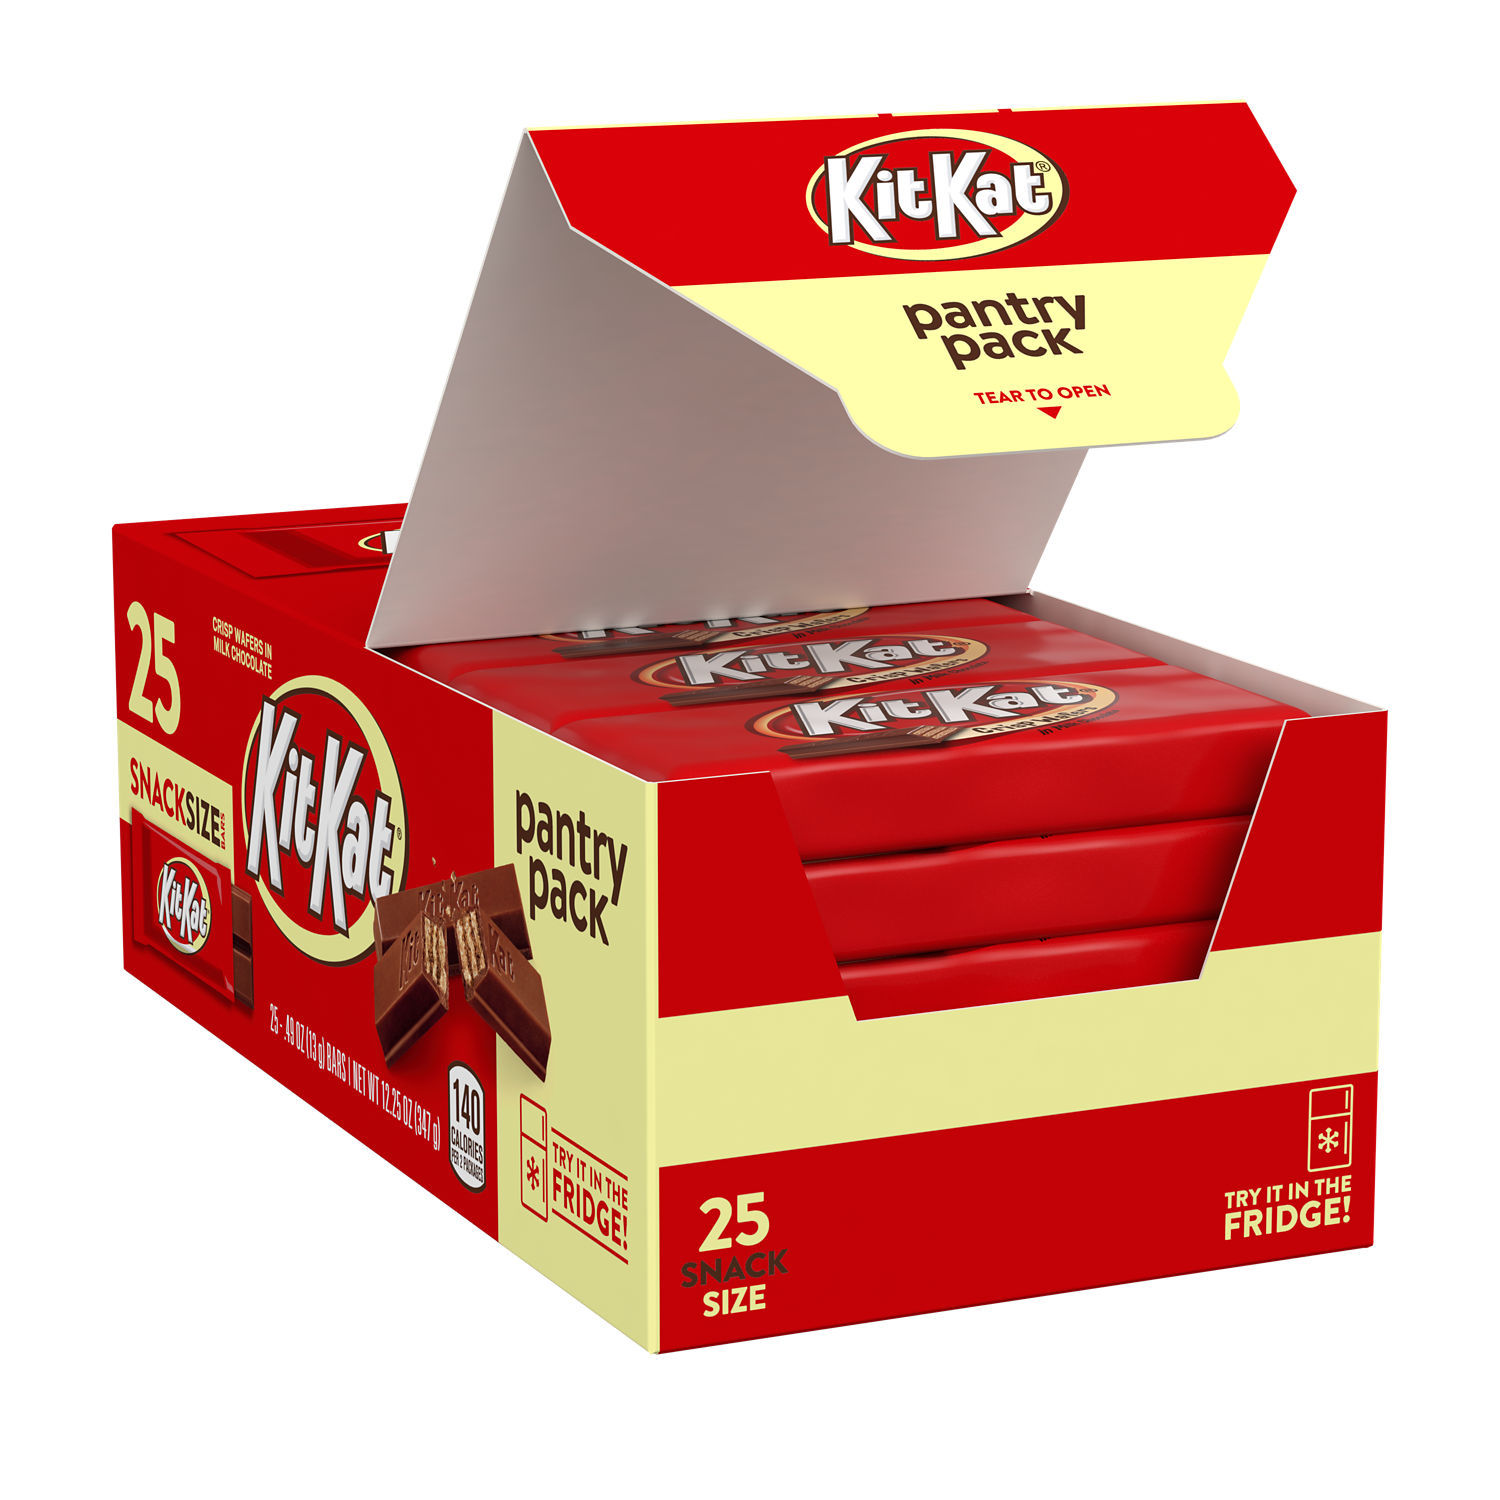 Kit Kat® Milk Chocolate Wafer Snack Size Candy, Pantry Pack 12.25 oz, 25 Pieces - image 1 of 8